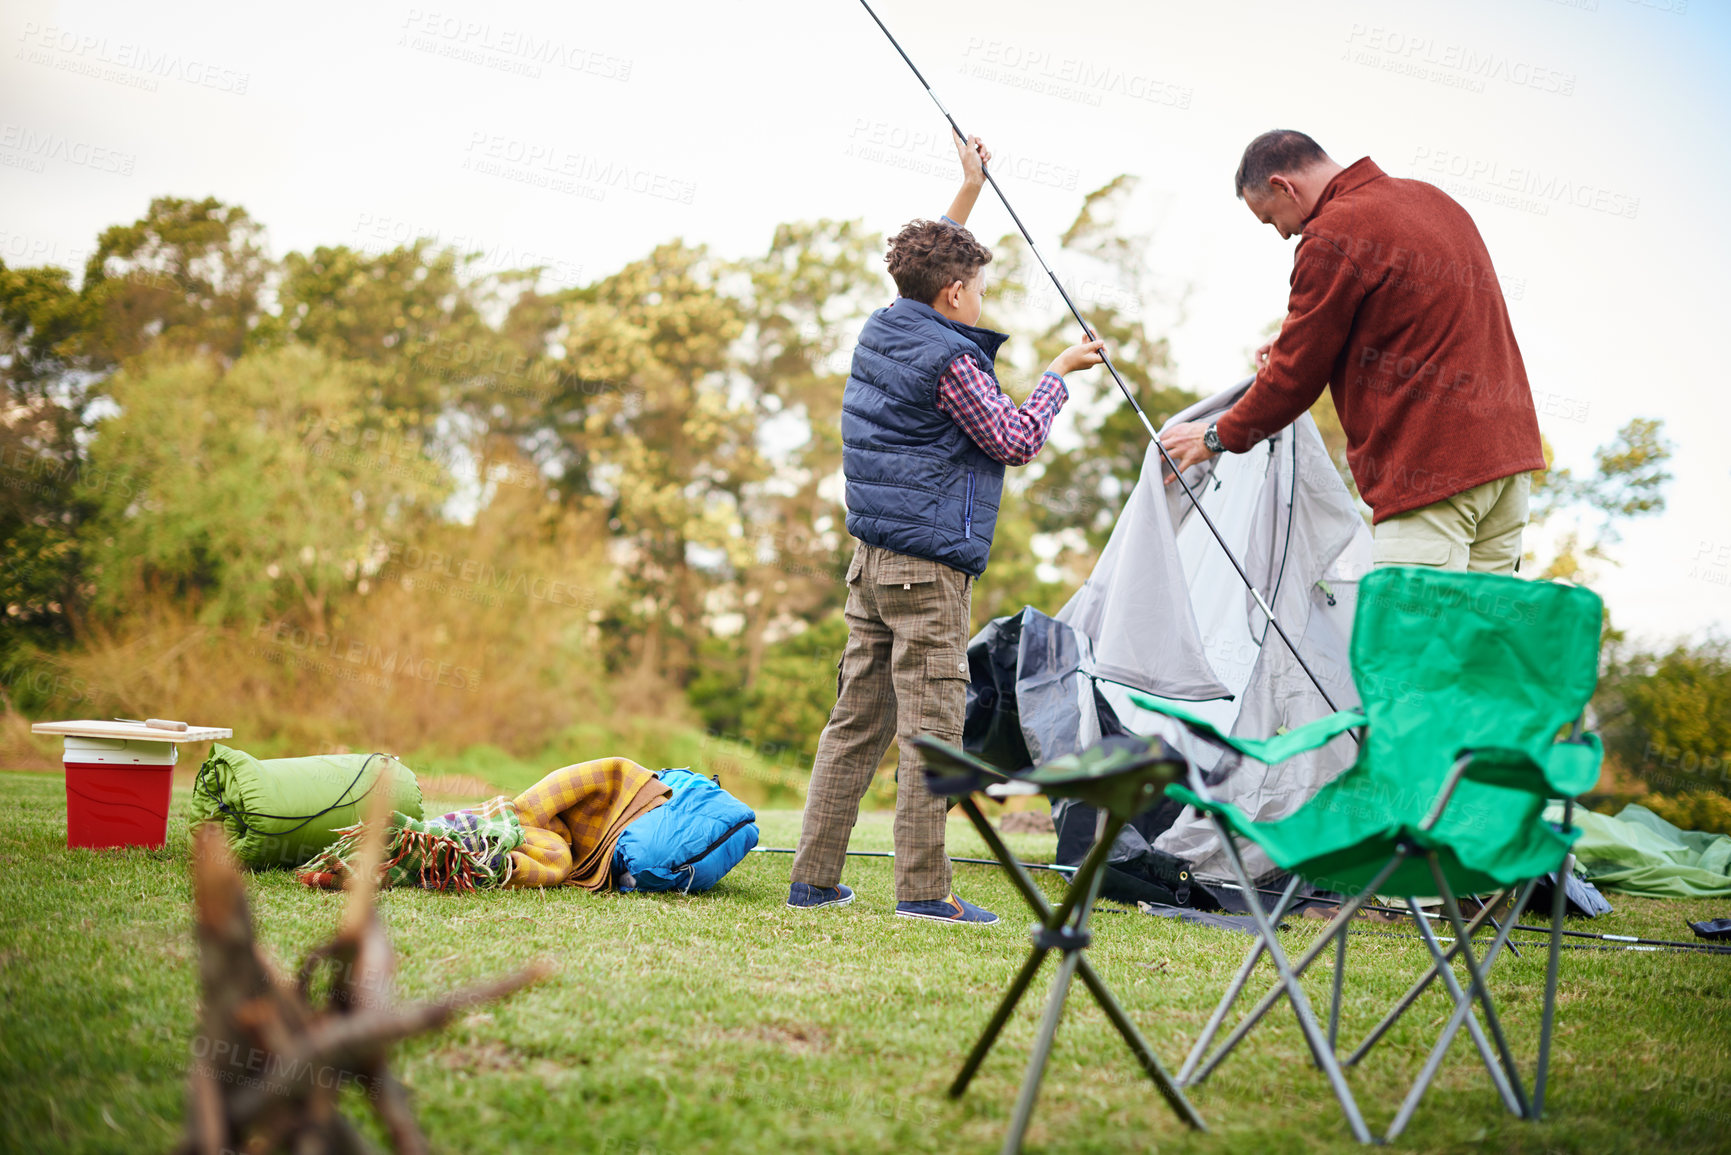 Buy stock photo Shot of a father and son setting up a tent together while camping